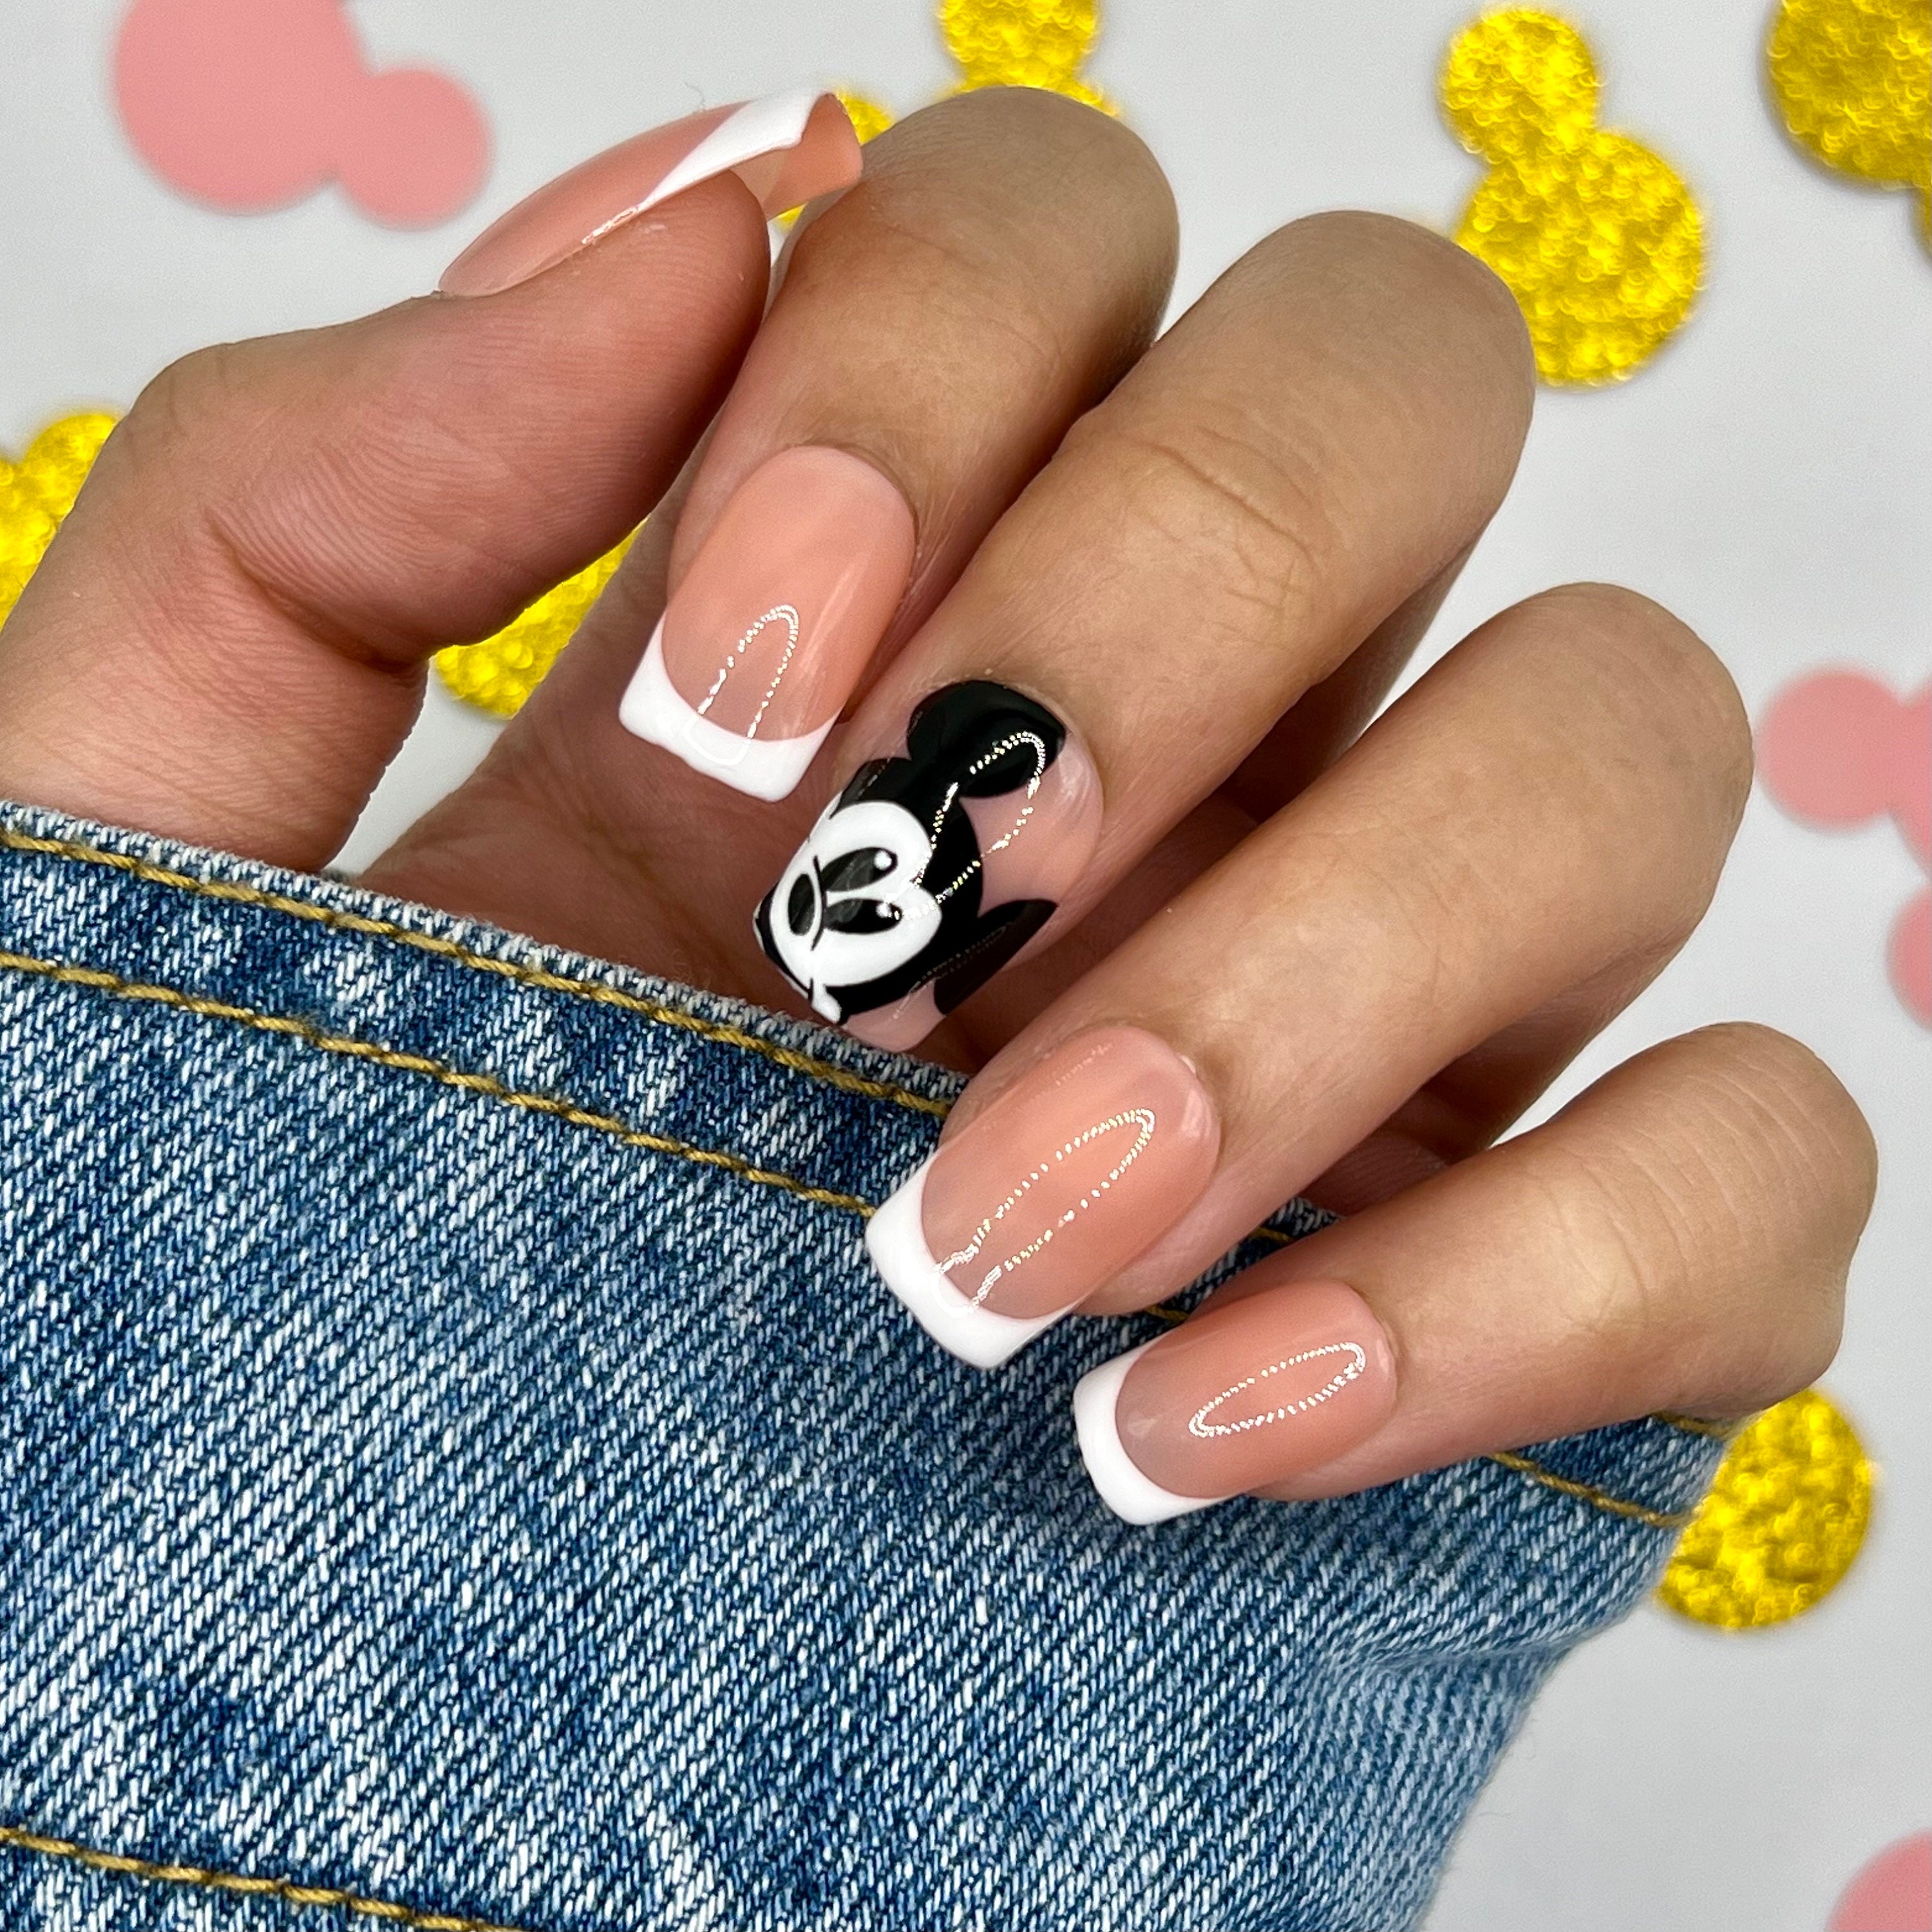 plus size work outfits  Mickey nails, Disney acrylic nails, Cute